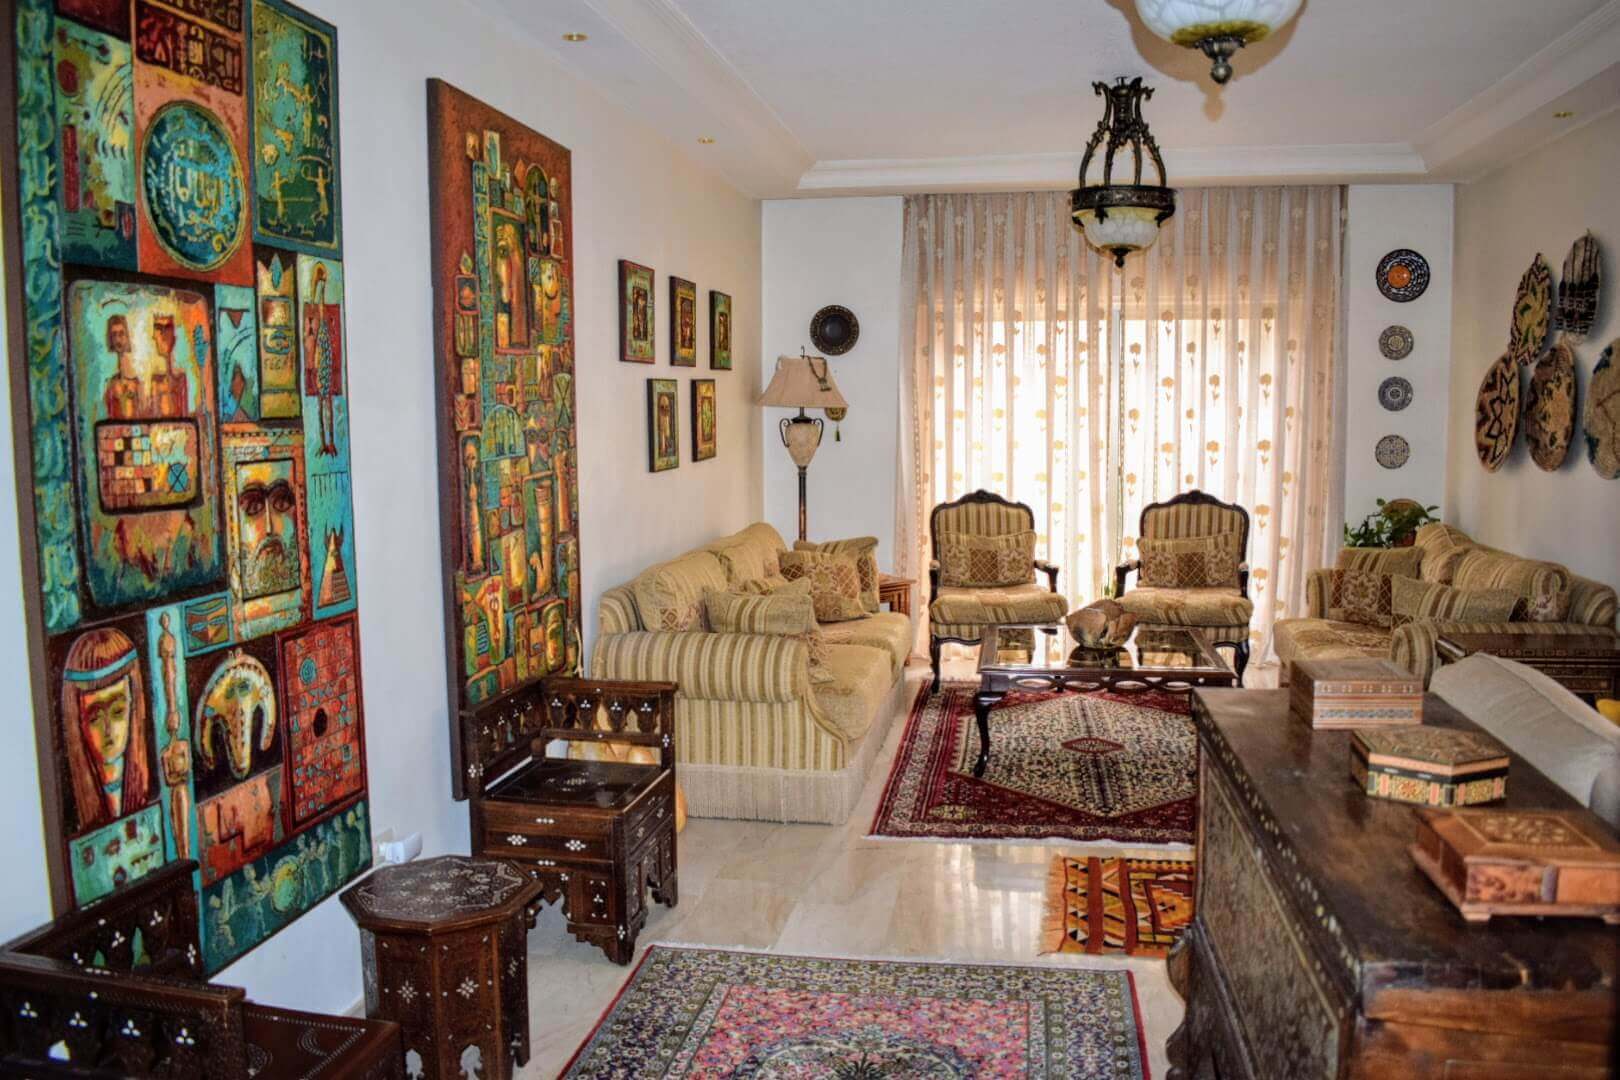 Arabic living room, with Syrian furniture, mother of pearl, rugs, carpets, artworks, woven baskets